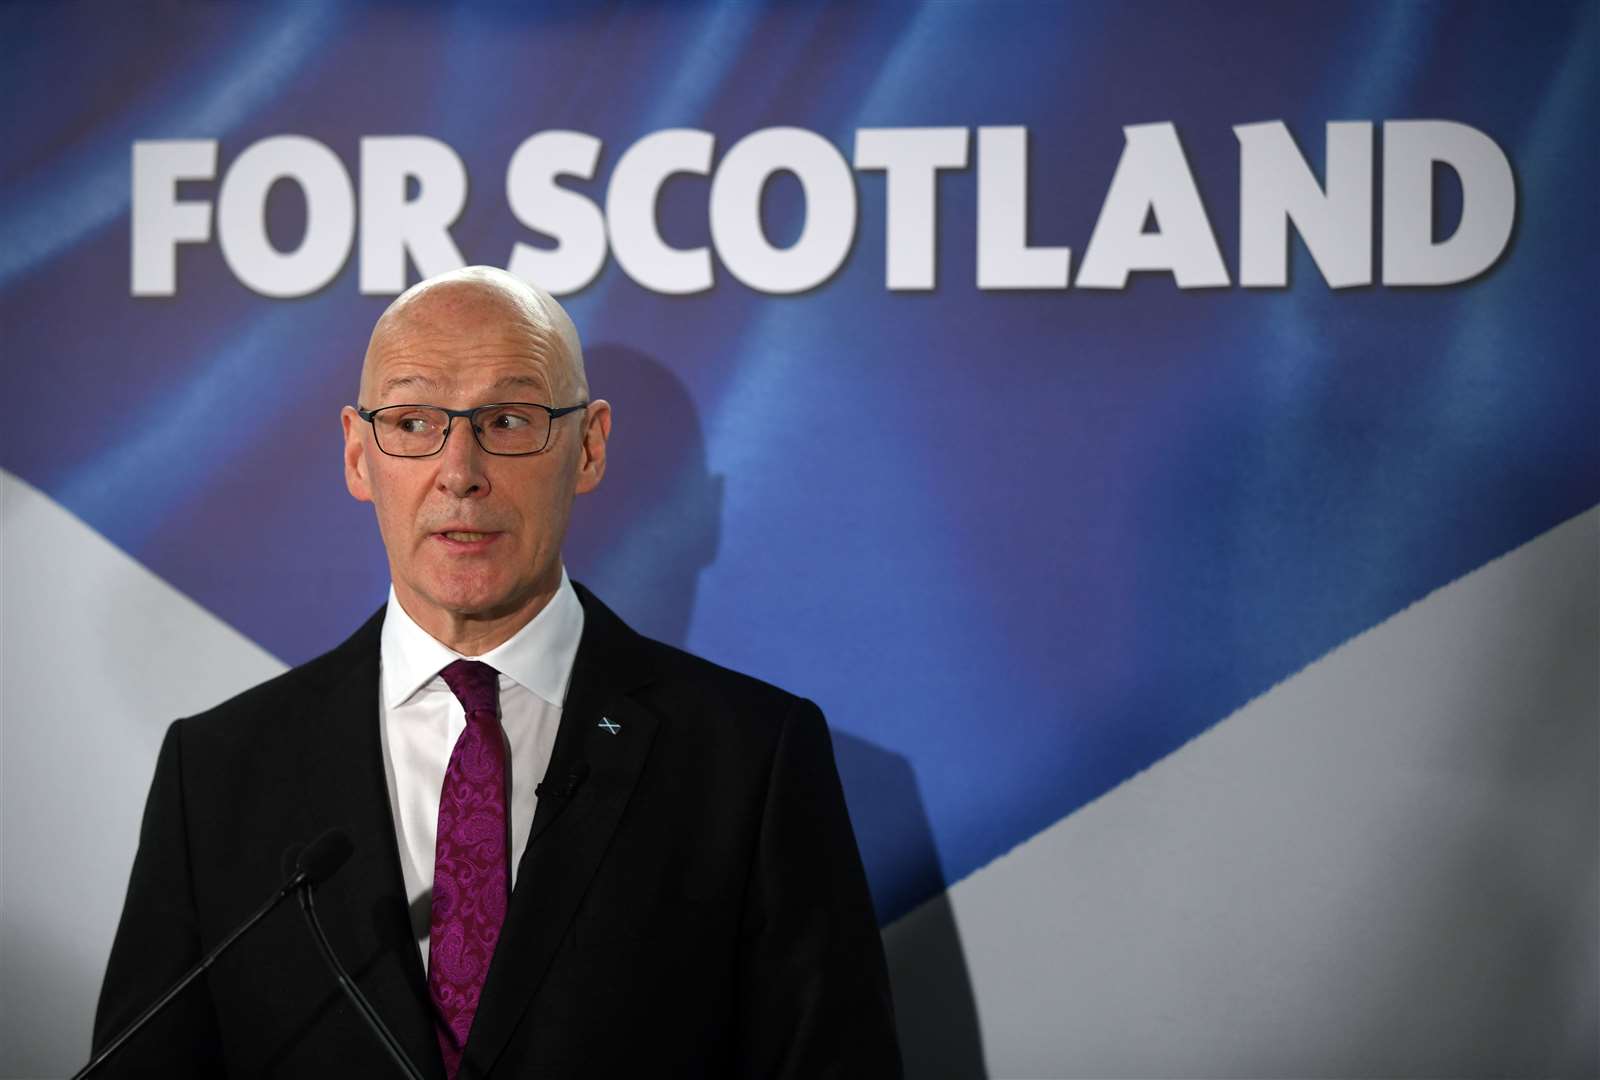 Sir Keir Starmer said the ‘only ambition’ of SNP – led by John Swinney – is to ‘break up the UK’ (Michael Boyd/PA)